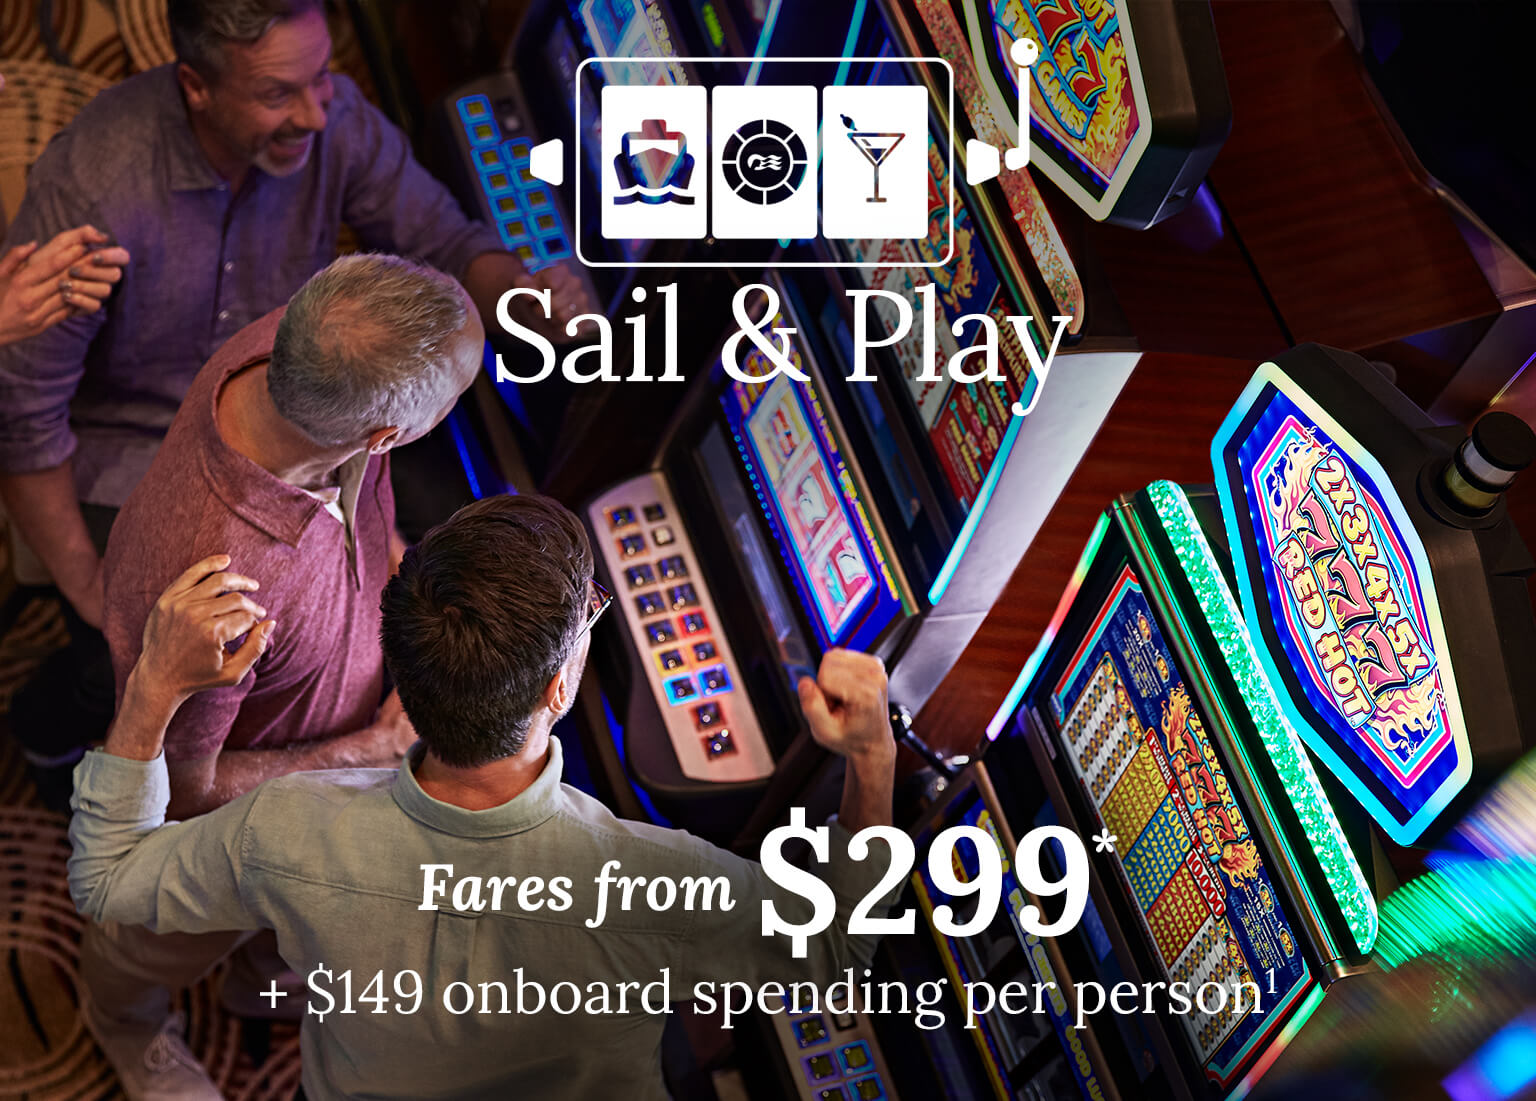 Group of people playing slots. fares from $299. $149 onboard spending per person on voyages 7 days or longer. Click here to book.